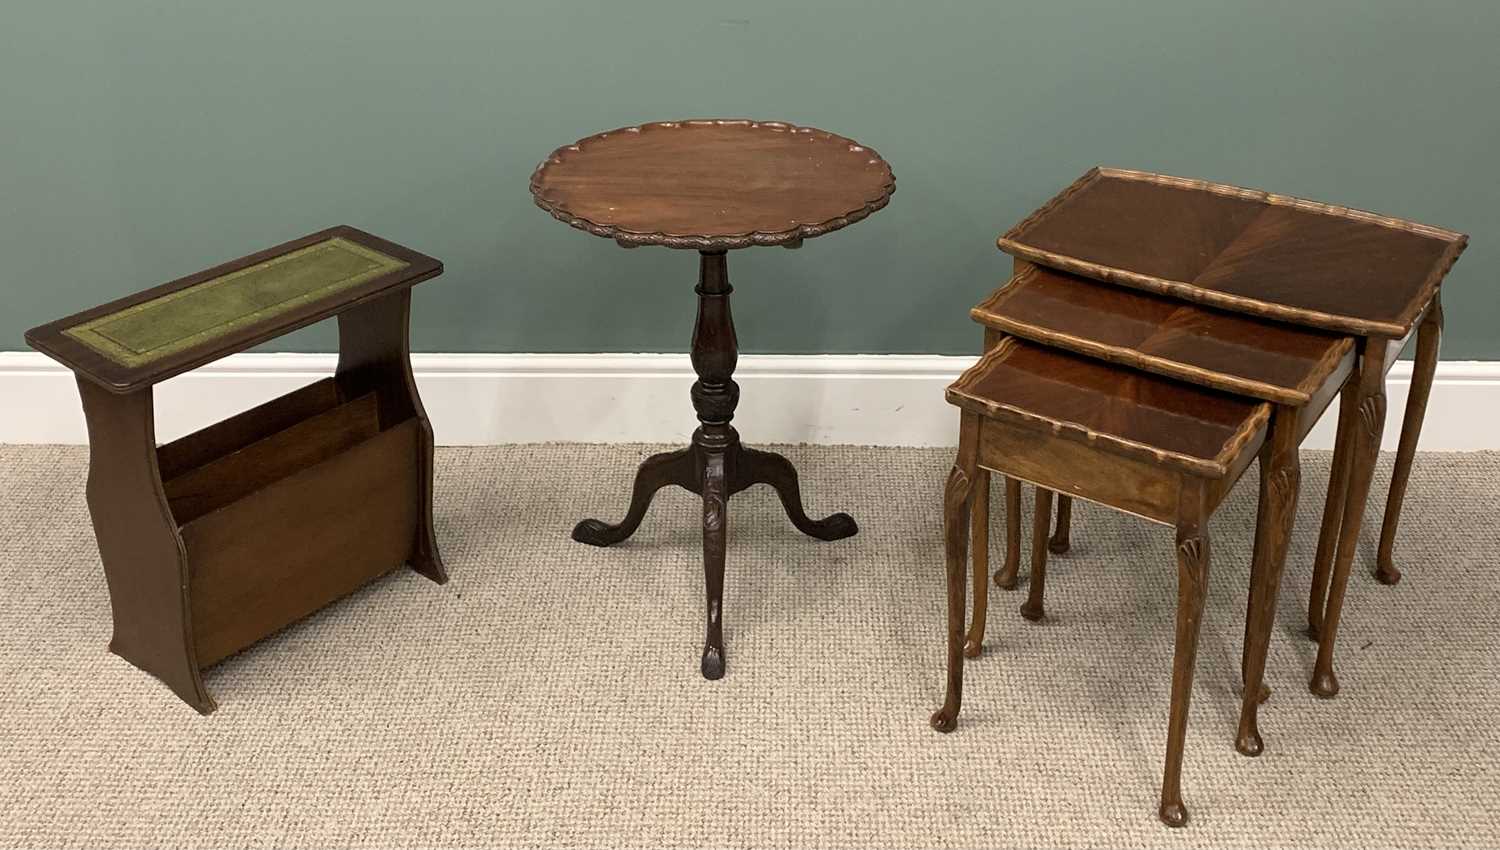 OCCASIONAL FURNITURE ITEMS comprising antique mahogany tilt-top tripod table, carved pie-crust